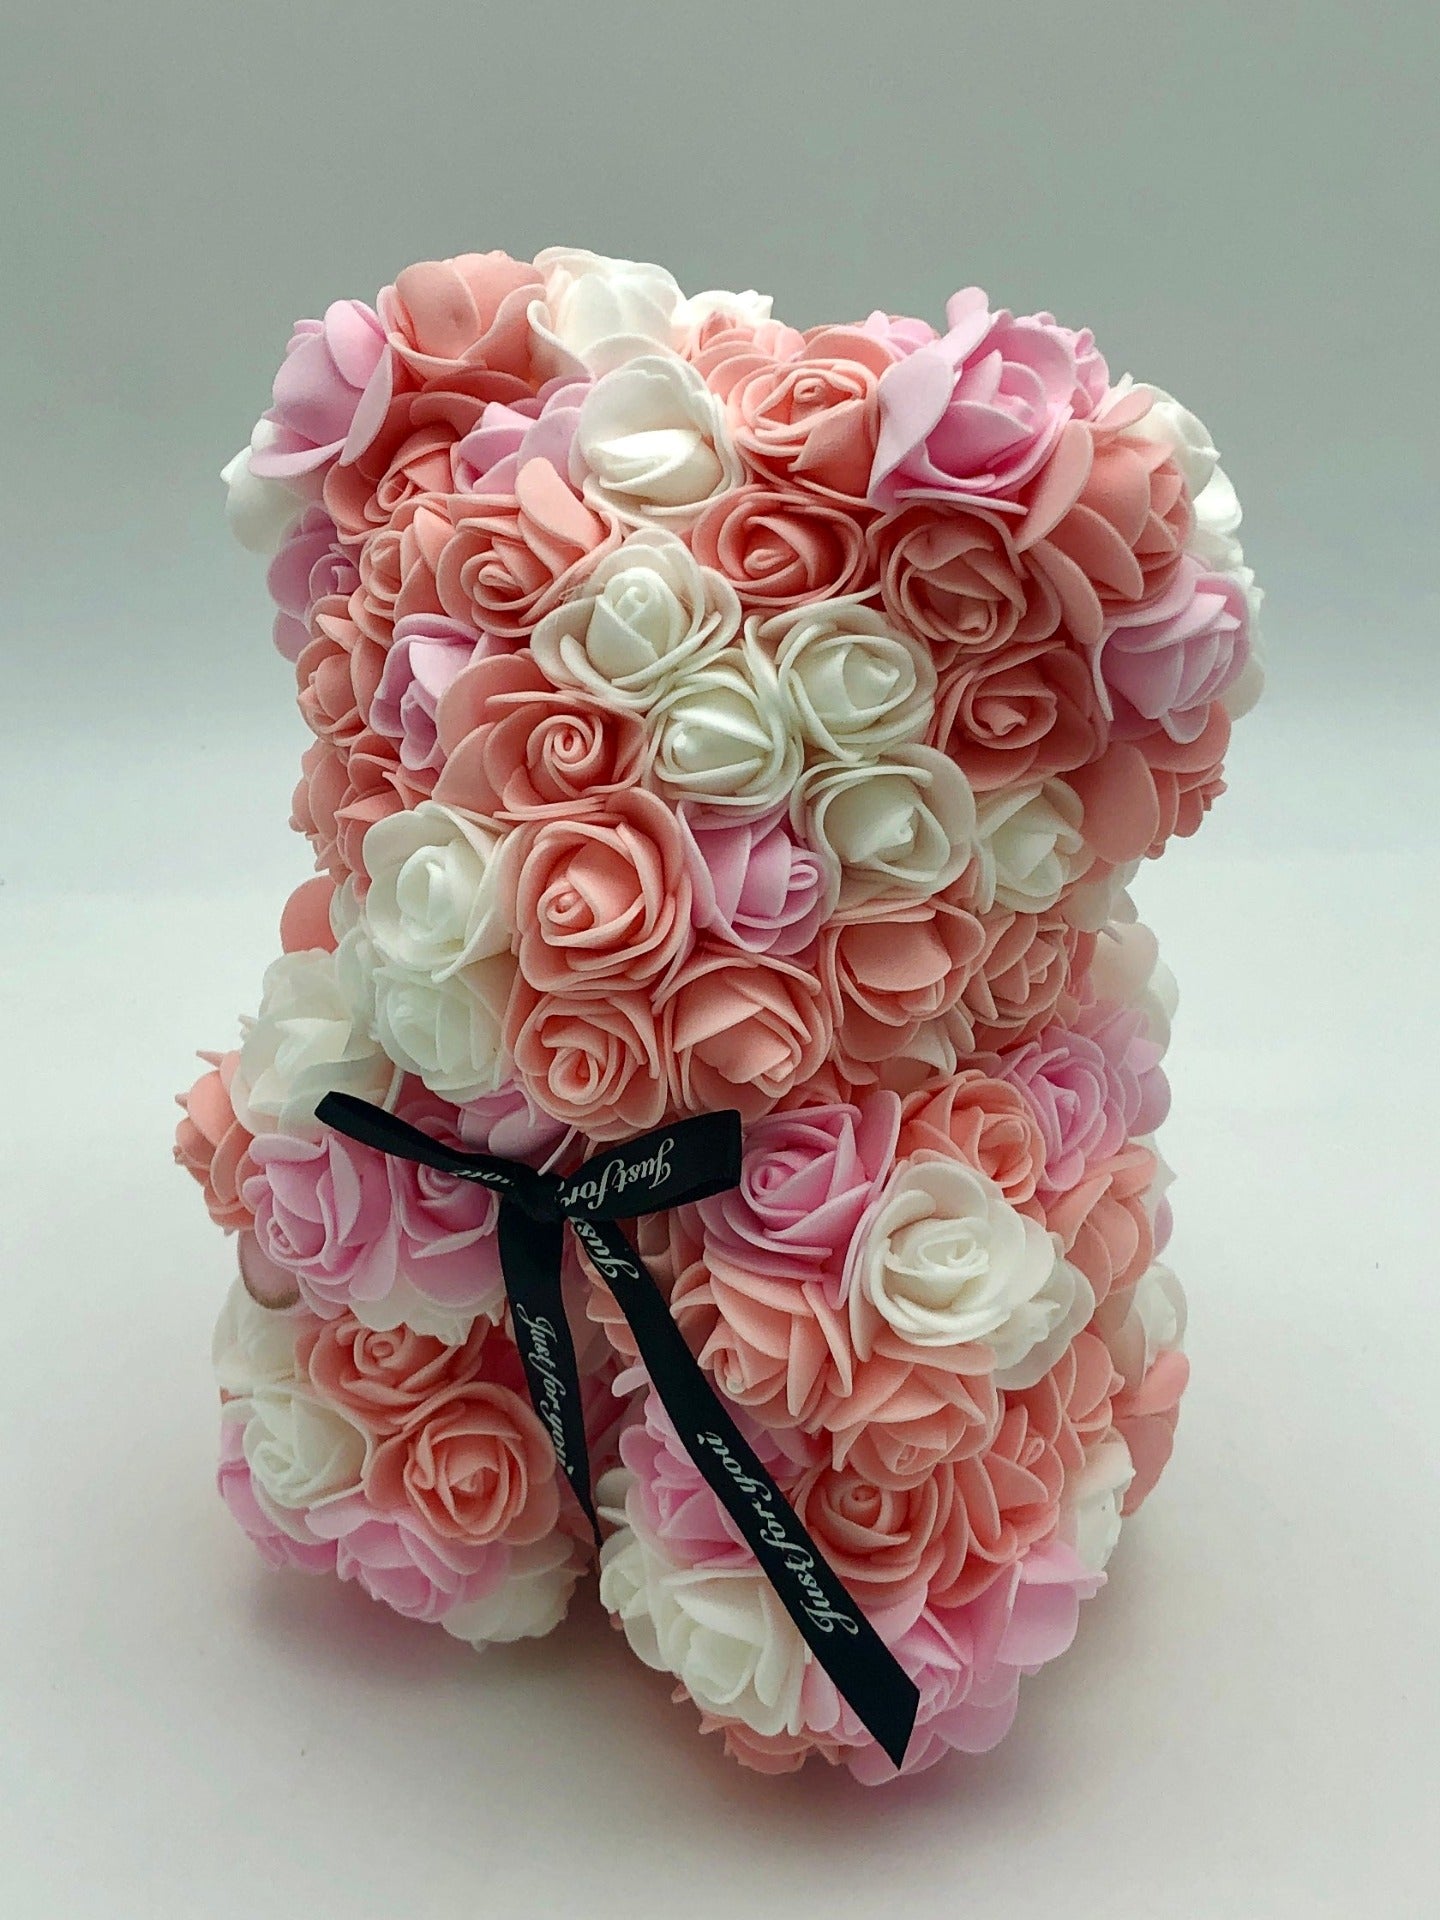 A teddy bear made from pink and white roses. The bear is standing upright and is adorned with a black ribbon. The background is plain white.